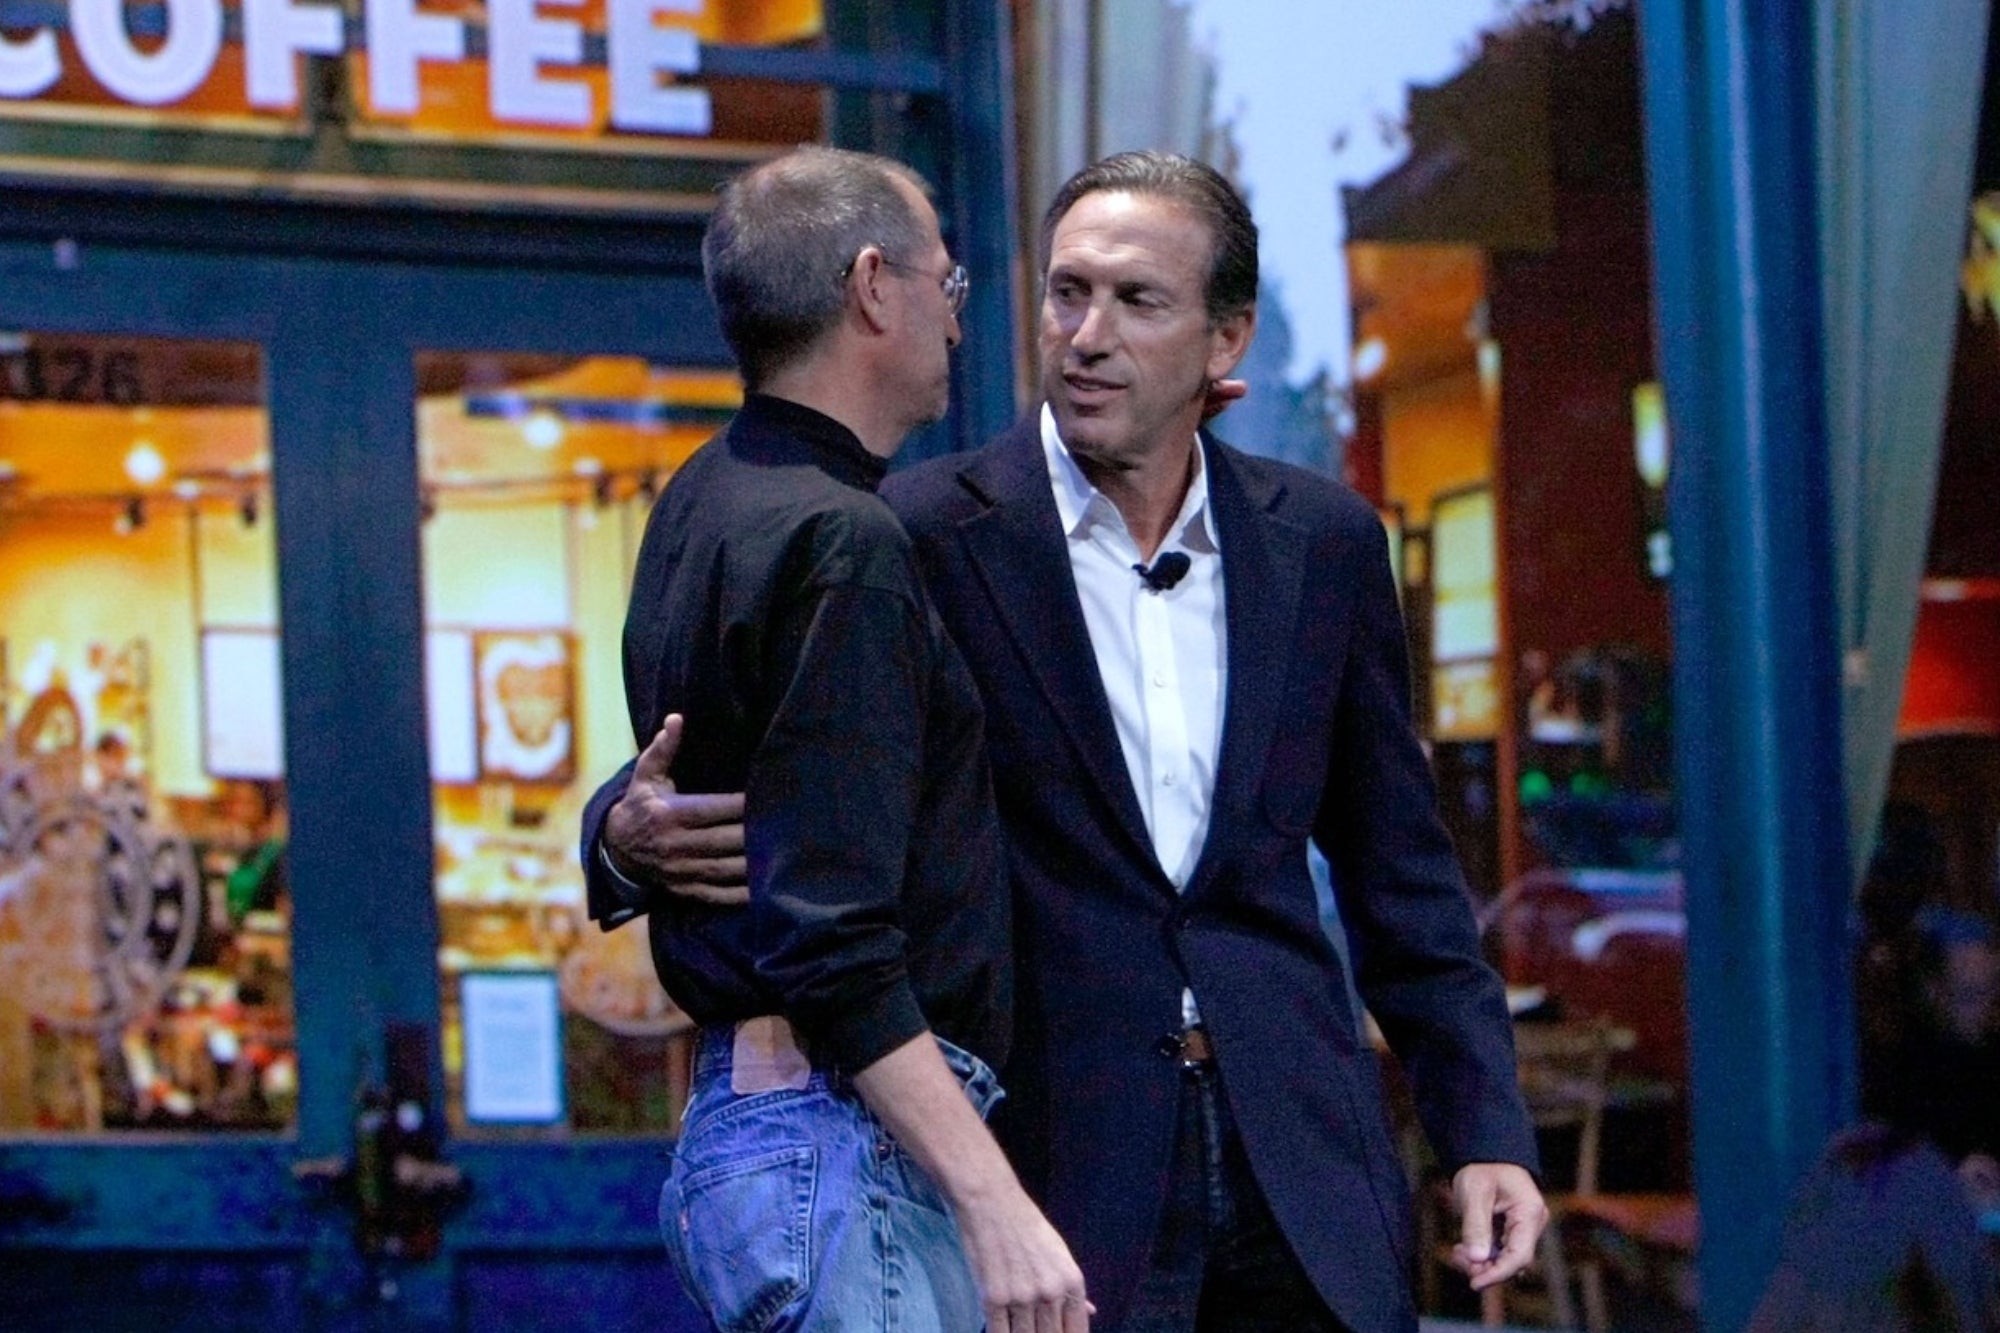 Howard Schultz: Steve Jobs Once Told Me to 